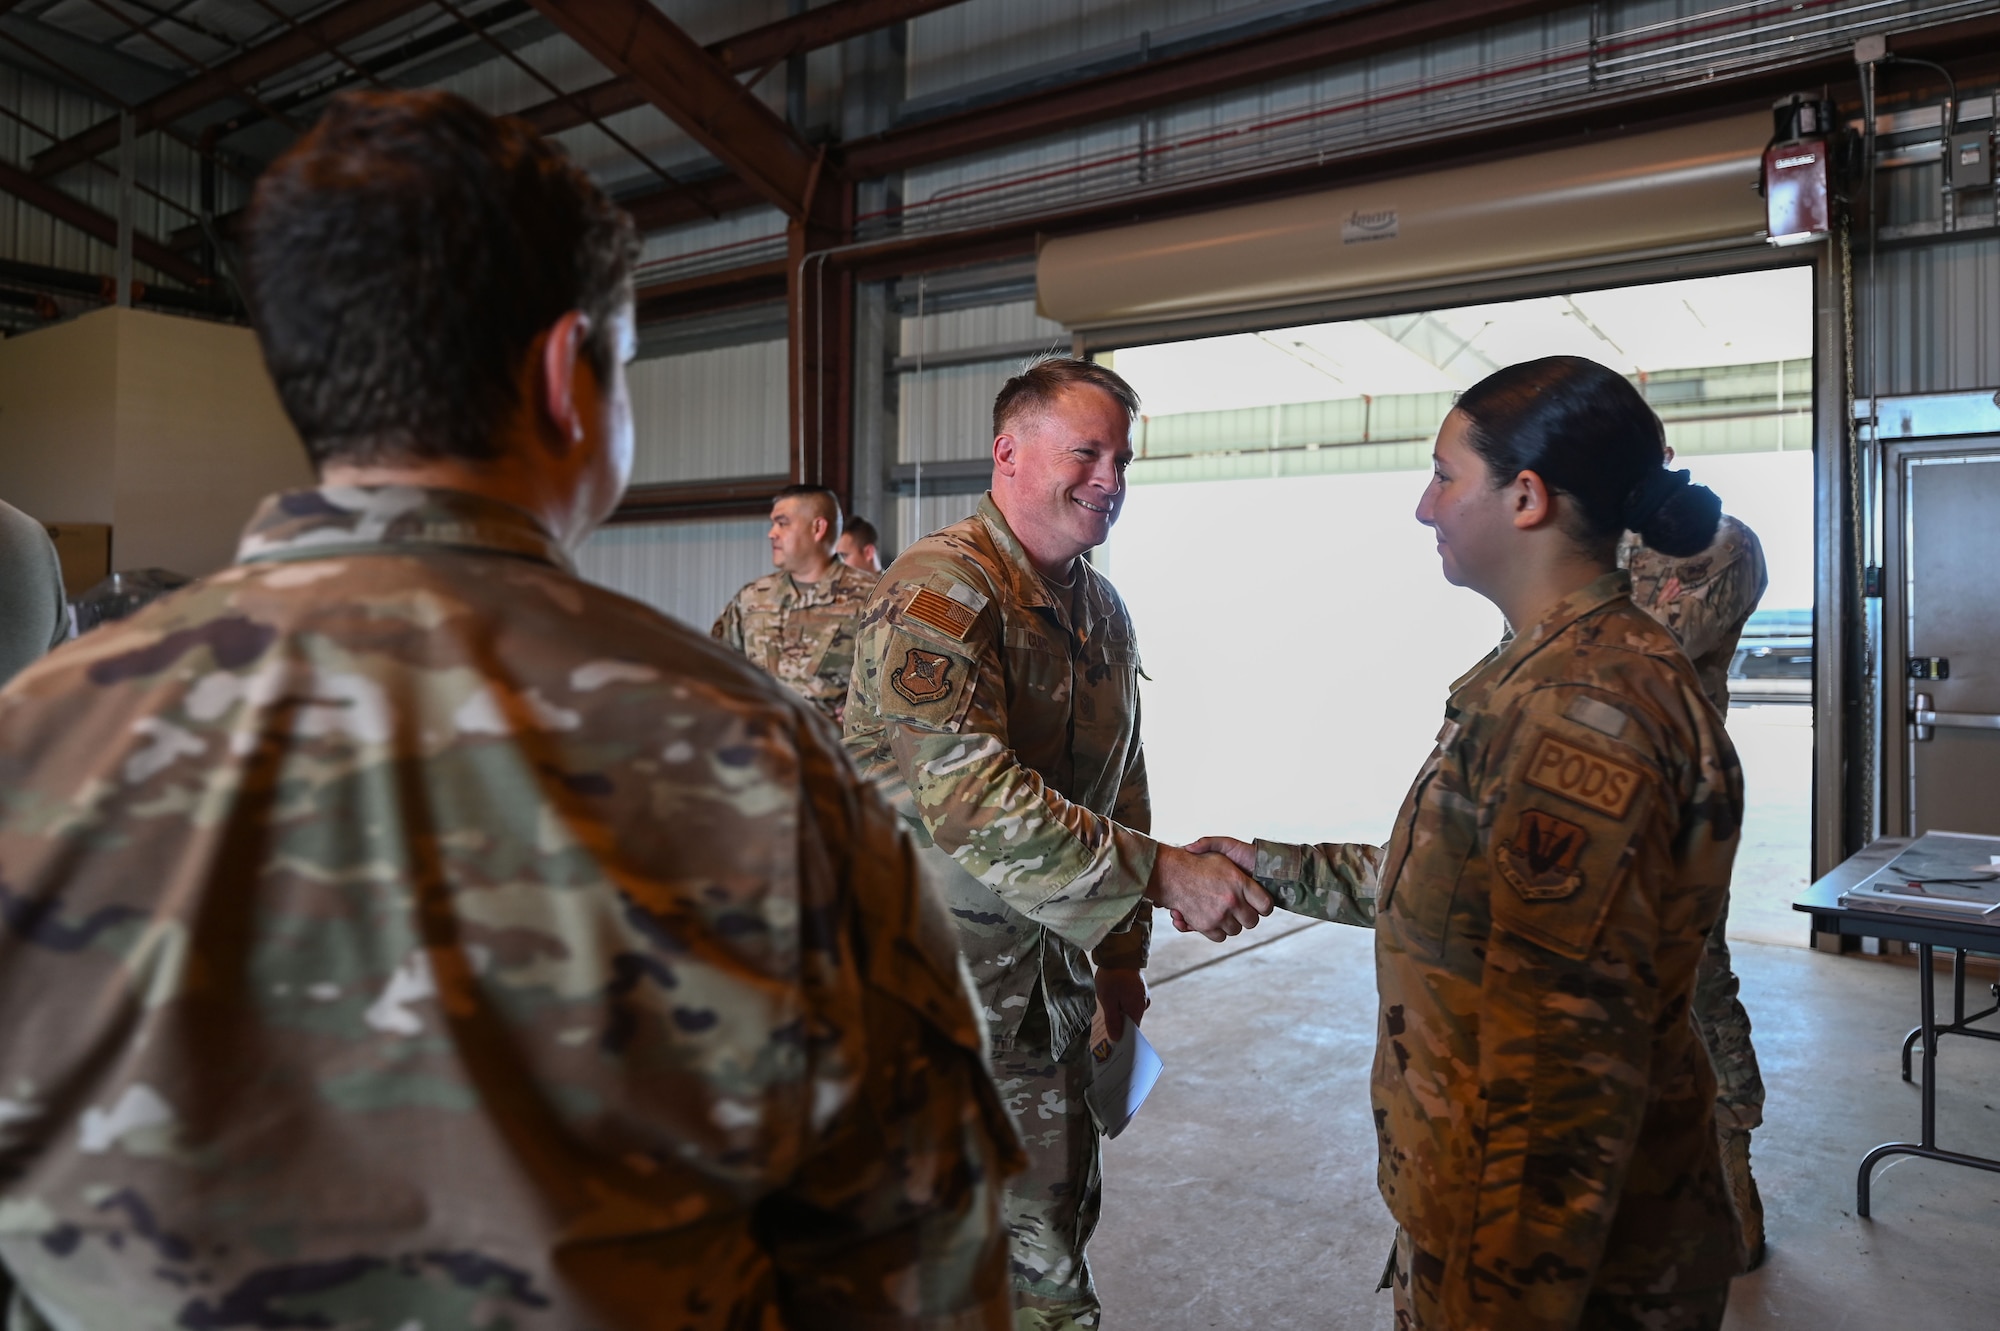 U.S. Air Force Chief Master Sgt. William Cupp, 350th Spectrum Warfare Wing command chief, meets Airmen from the 36th Electronic Warfare Squadron at Eglin Air Force Base, Fla., July 31, 2023. Cupp has a diverse experience across the aircraft maintenance, operations, and agile combat support fields. (U.S. Air Force photo by Staff Sgt. Ericka A. Woolever)